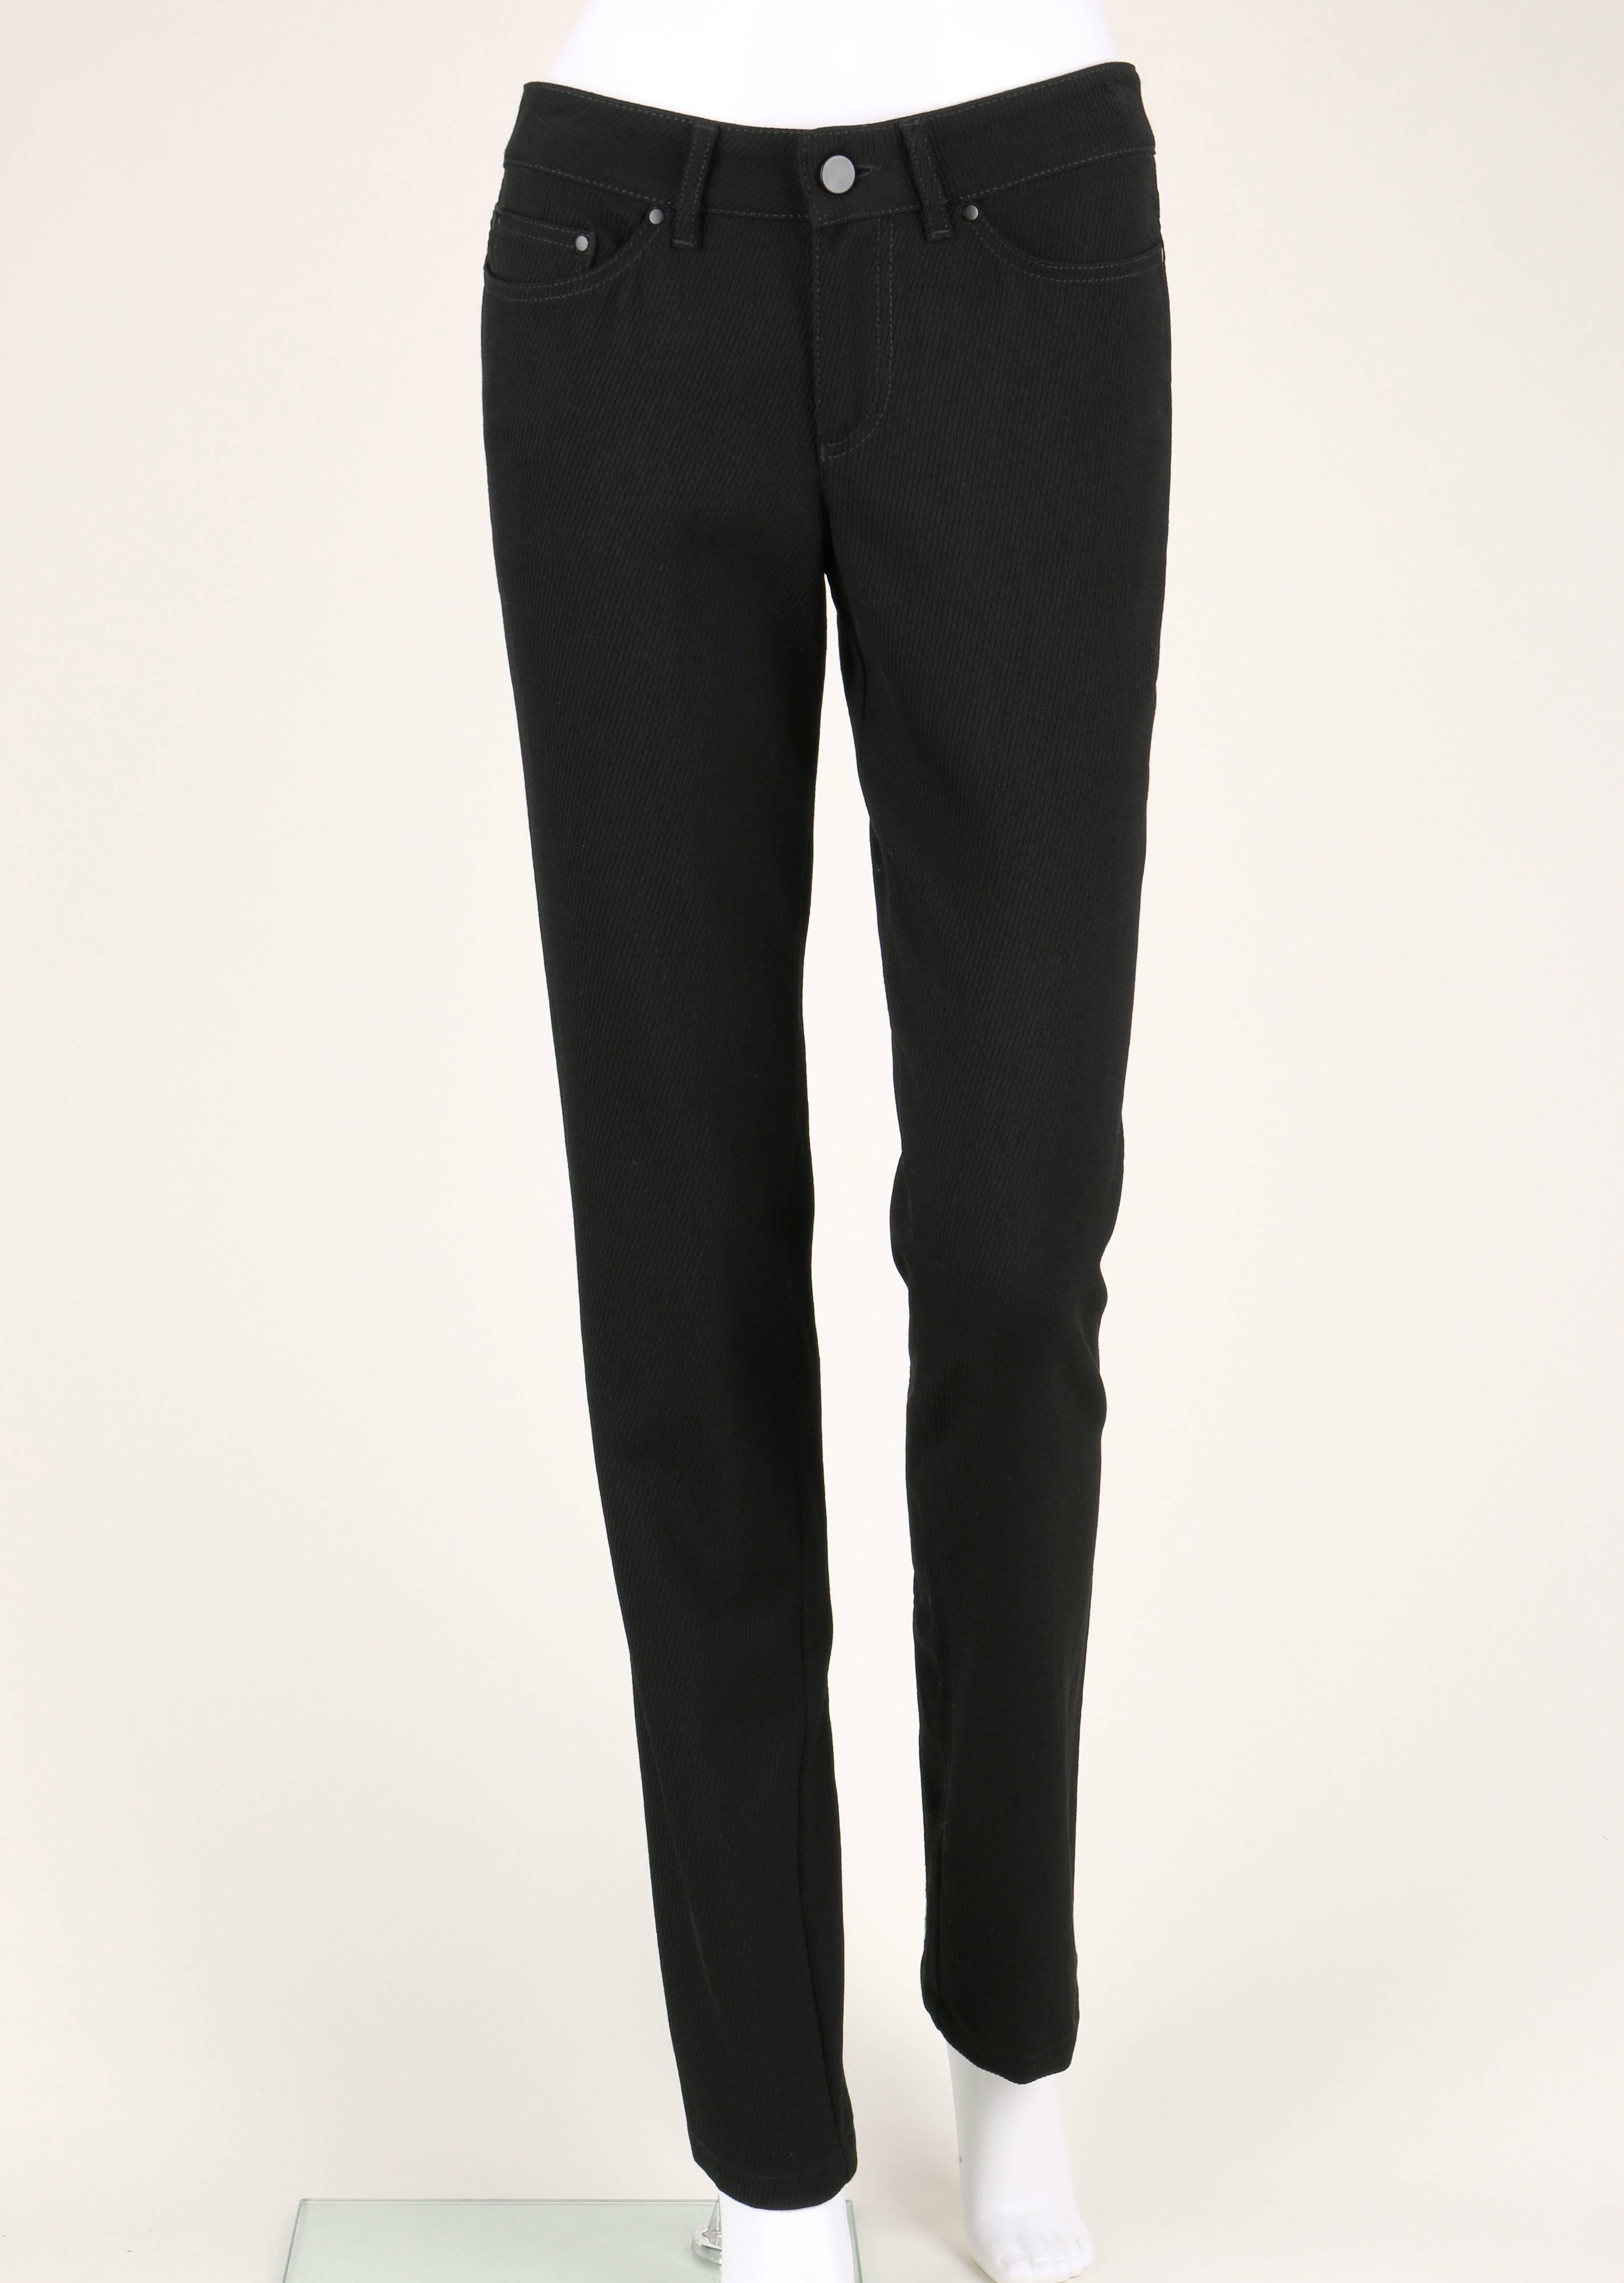 Alexander McQueen c.2007 black ribbed wool pants. Classic five pocket style. Straight leg. Embroidered skull detail on back right pocket. Patent leather trimmed zipper detail at back of legs. Belt loops. Zipper fly and button closure. Photographed